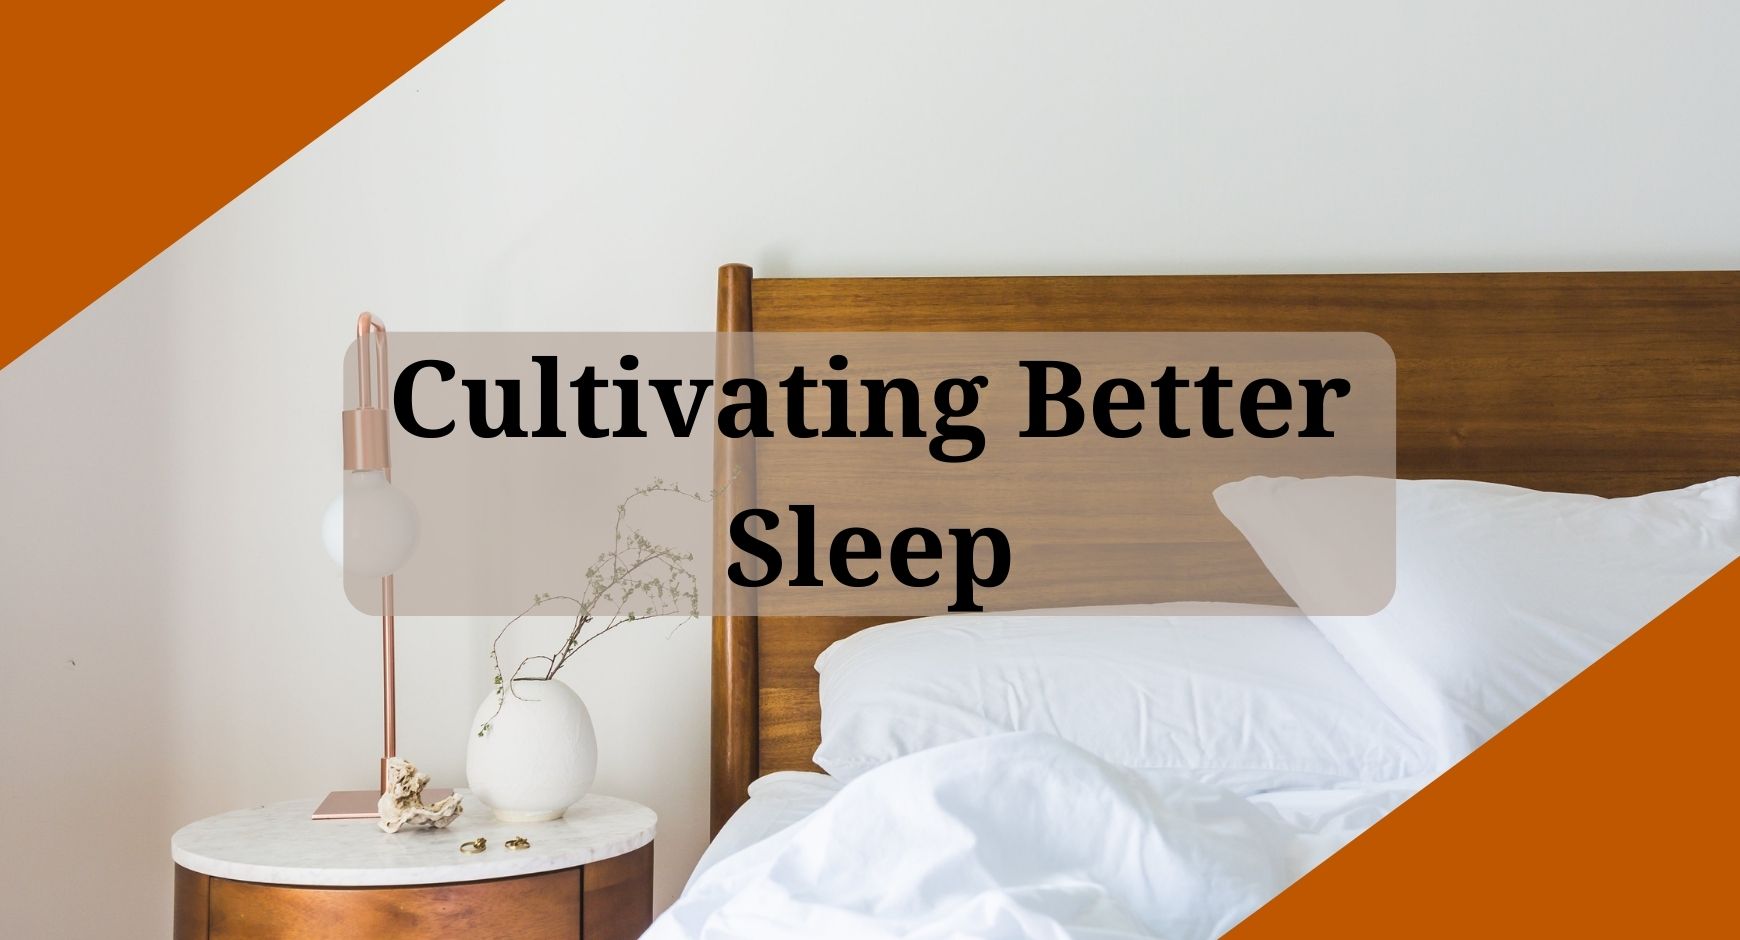 A bed and nightstand under text that reads "Cultivating Better Sleep"